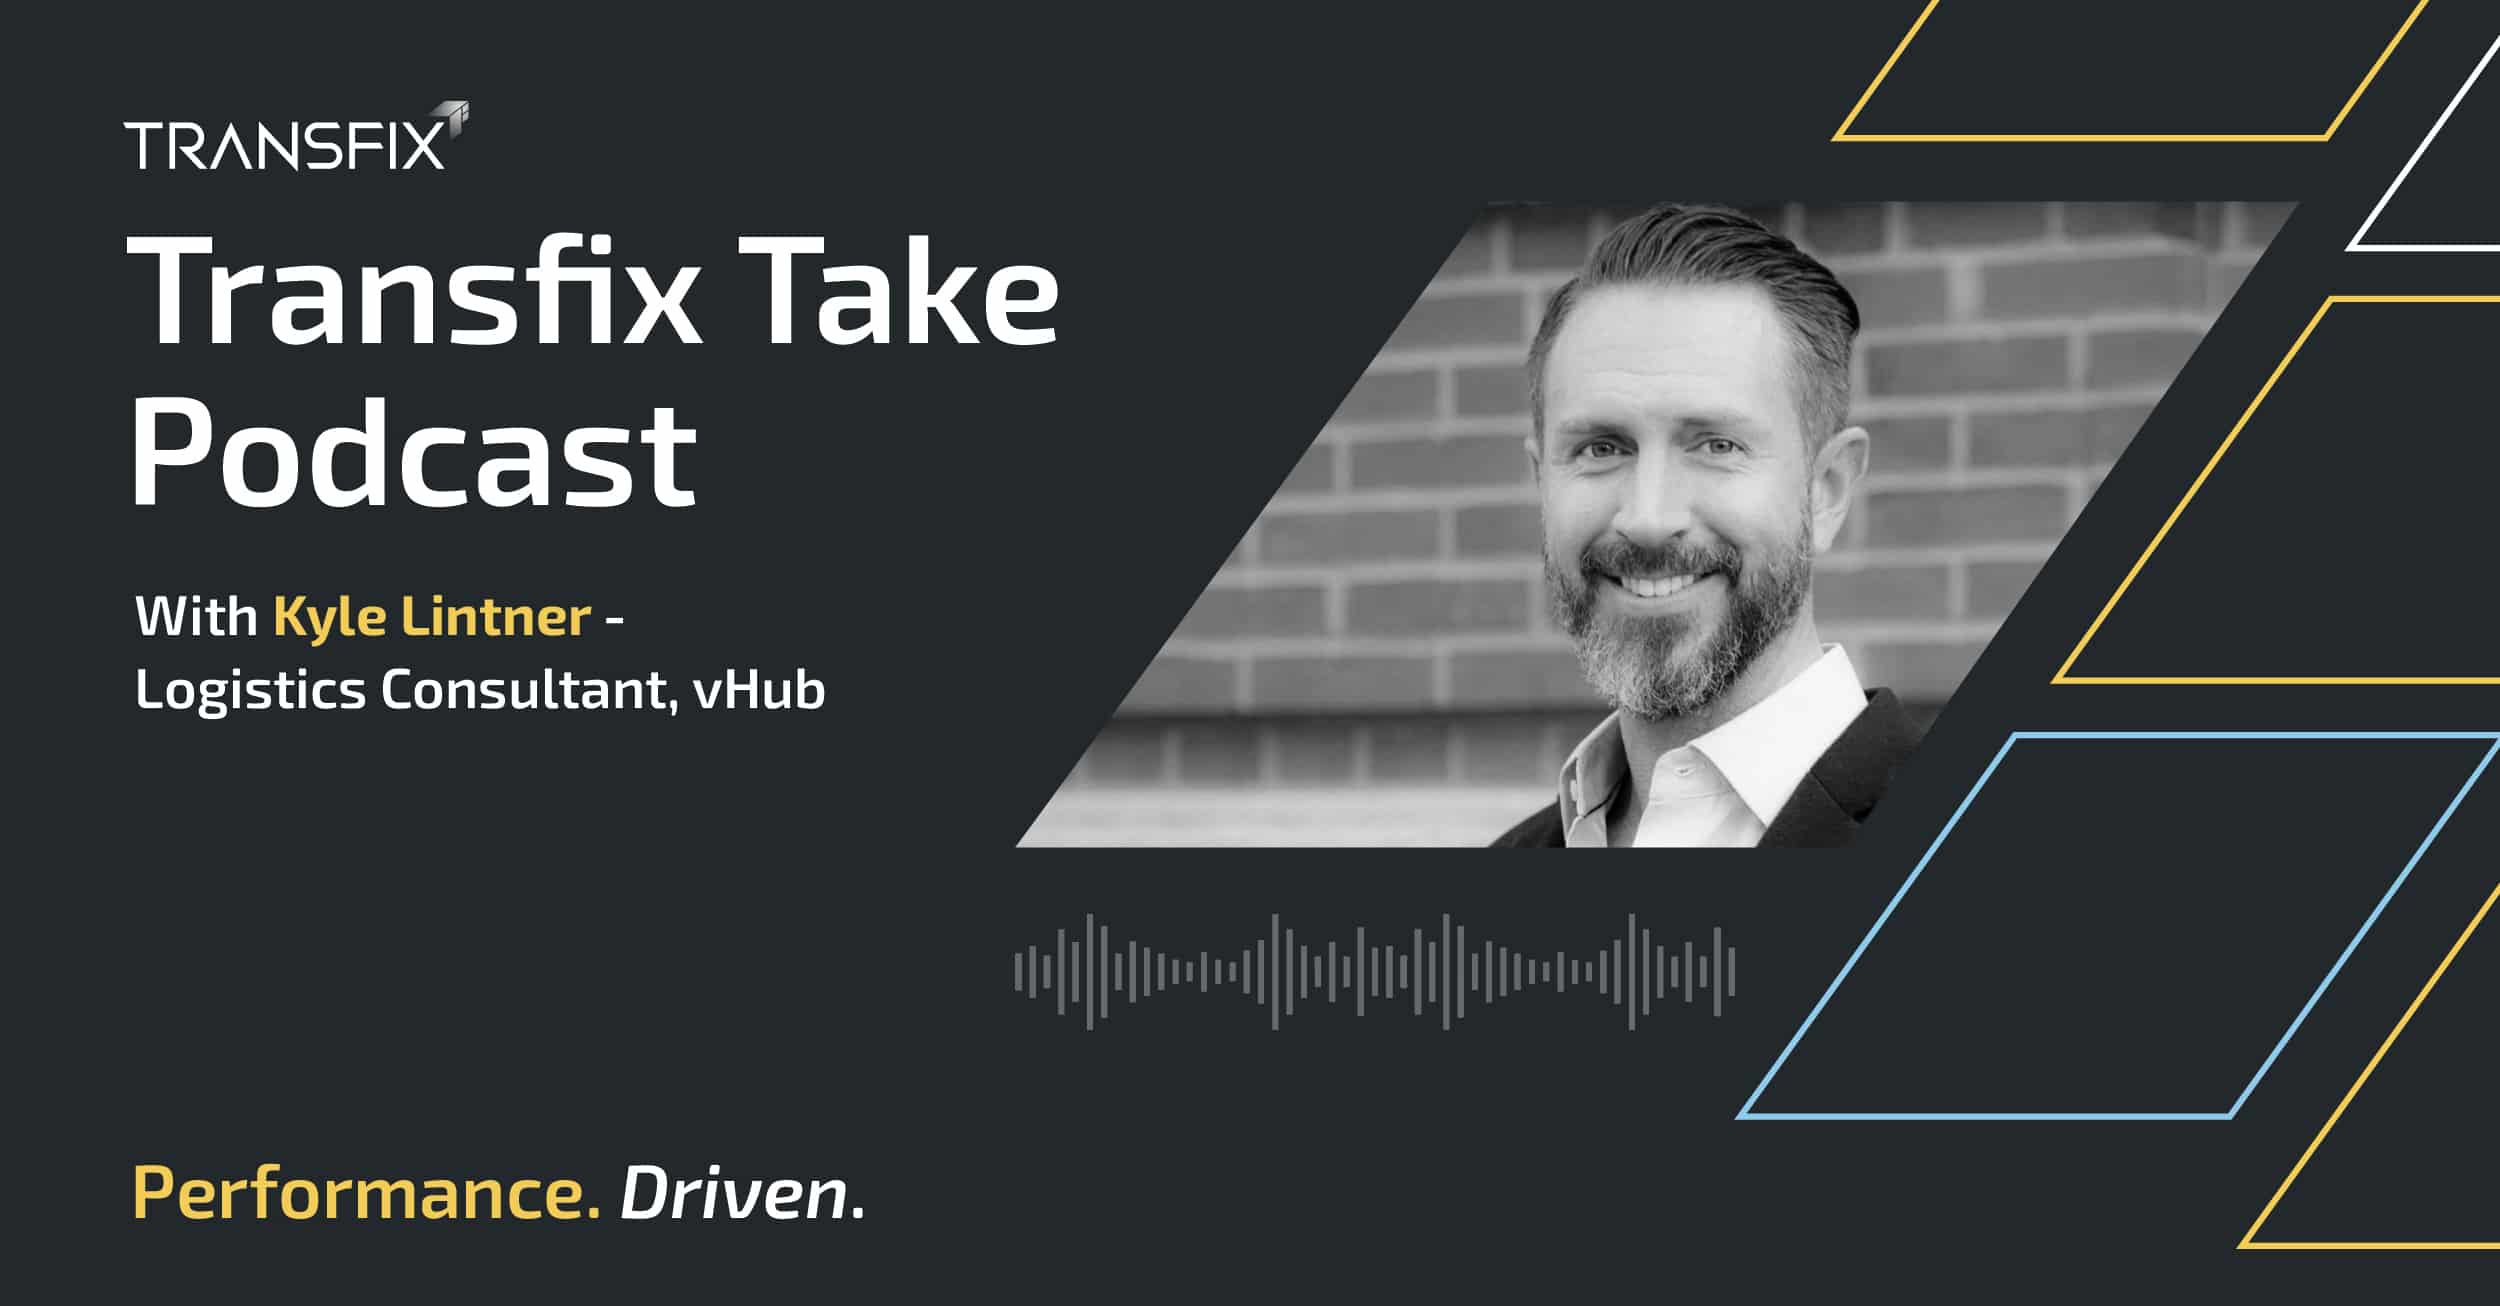 Industry Veteran, Kyle Lintner, Lends His Insights to the Transfix Take Podcast